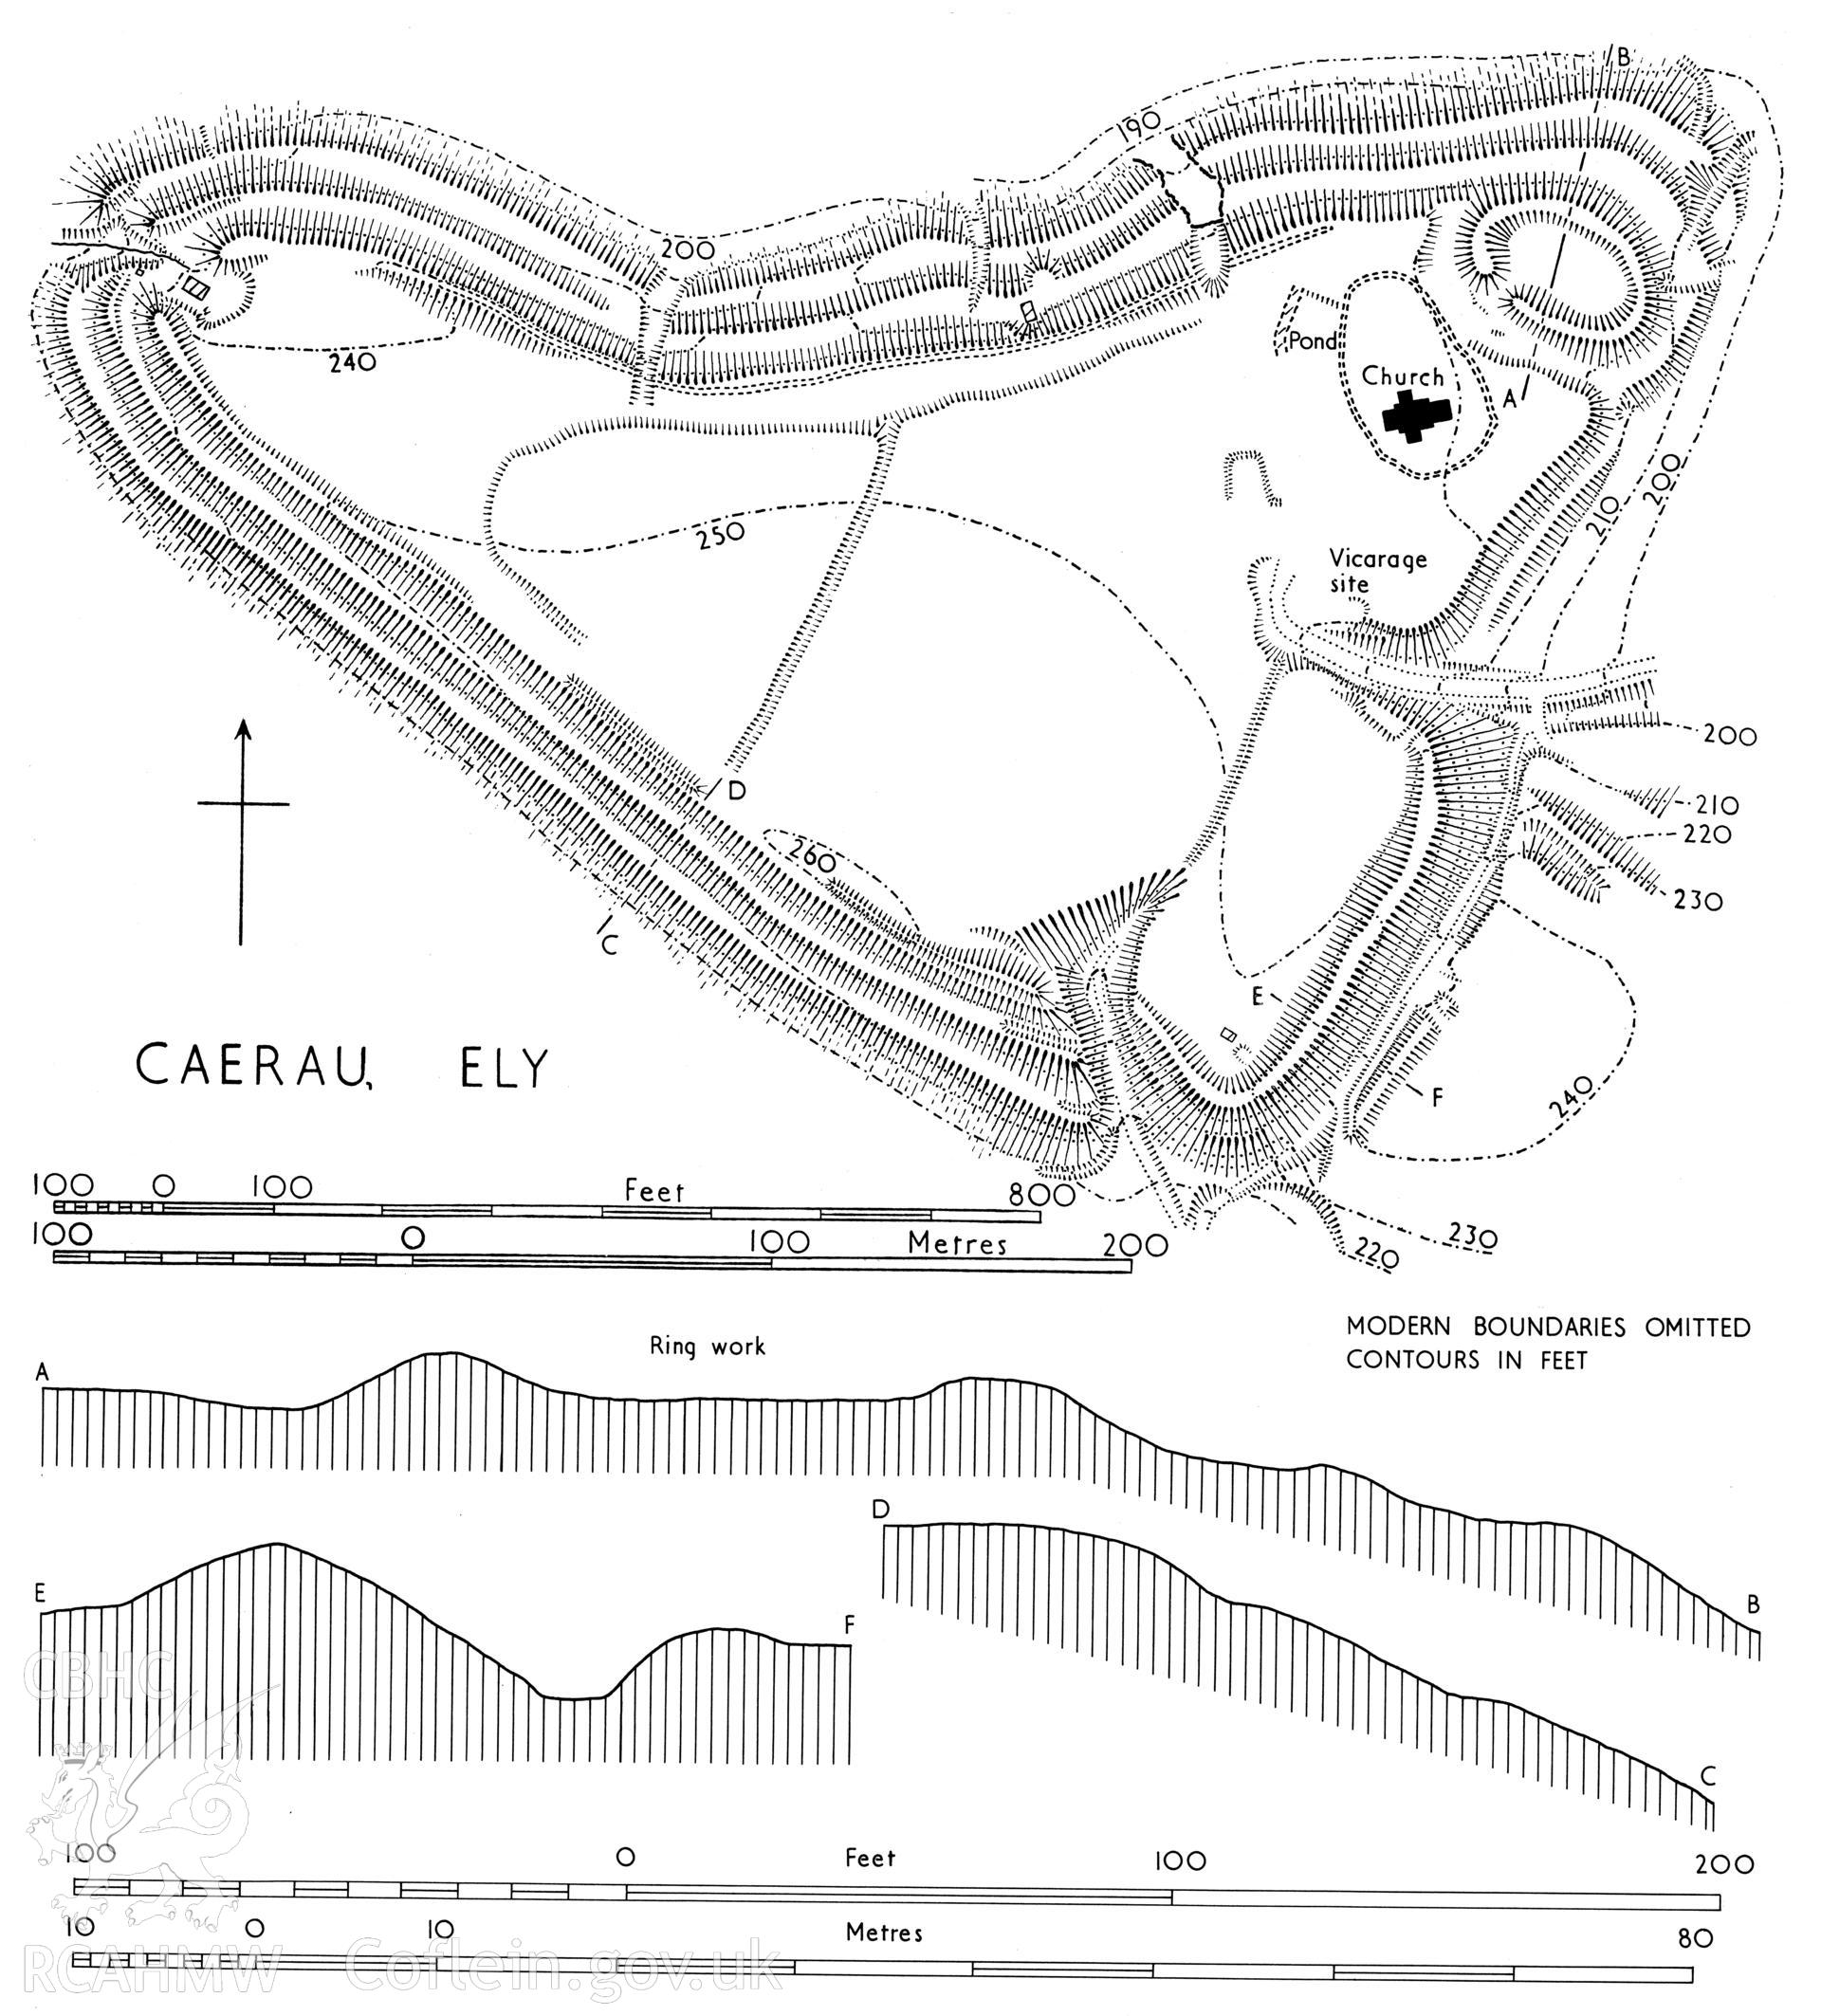 RCAHMW drawing showing plan and section of Caerau, Ely, published in Glamorgan I, ii, fig 23.